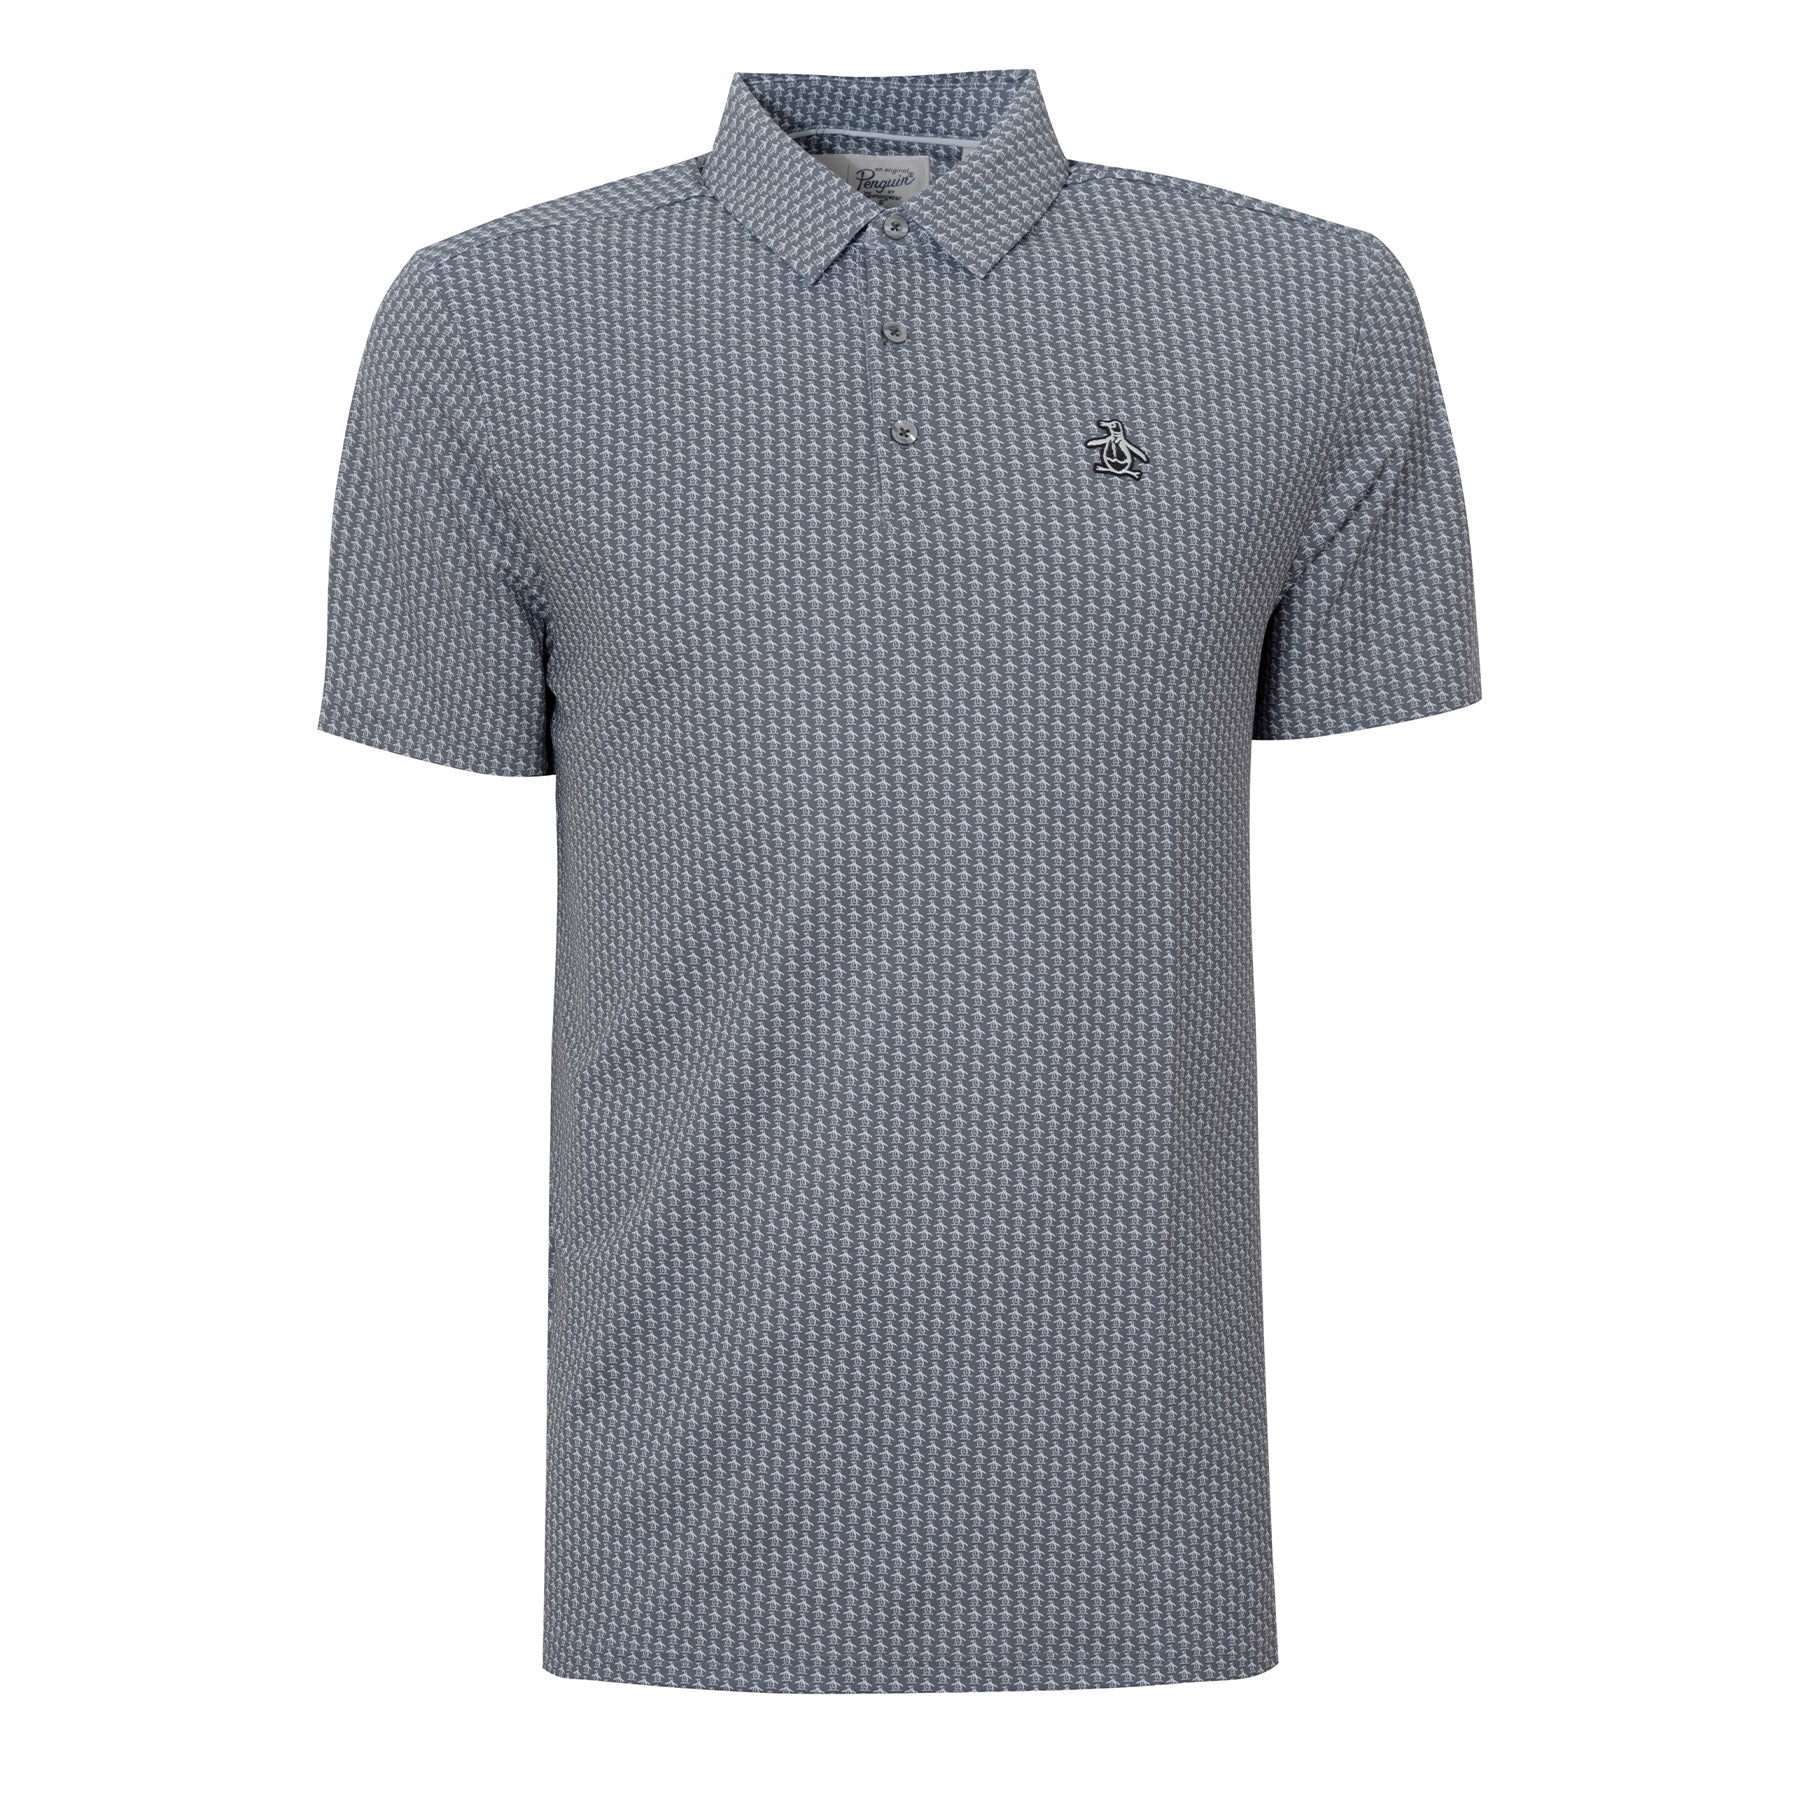 View AllOver Pete Print Golf Polo Shirt In Quiet Shade information